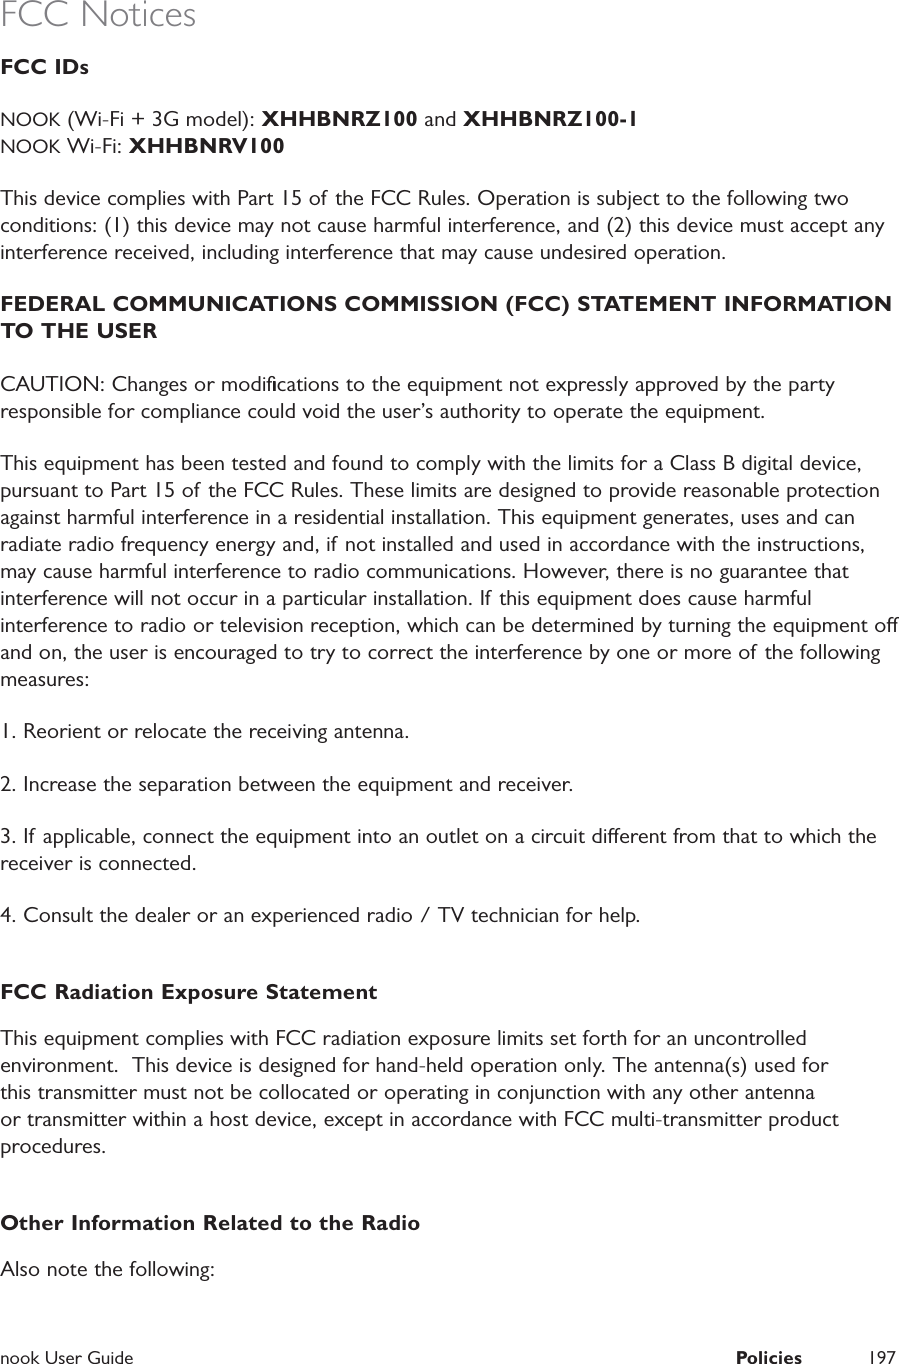  nook User Guide  Policies 197FCC NoticesFCC IDs NOOK (Wi-Fi + 3G model): XHHBNRZ100 and XHHBNRZ100-1NOOK Wi-Fi: XHHBNRV100This device complies with Part 15 of the FCC Rules. Operation is subject to the following two conditions: (1) this device may not cause harmful interference, and (2) this device must accept any interference received, including interference that may cause undesired operation.FEDERAL COMMUNICATIONS COMMISSION (FCC) STATEMENT INFORMATION TO THE USER CAUTION: Changes or modiﬁcations to the equipment not expressly approved by the party responsible for compliance could void the user’s authority to operate the equipment. This equipment has been tested and found to comply with the limits for a Class B digital device, pursuant to Part 15 of the FCC Rules. These limits are designed to provide reasonable protection against harmful interference in a residential installation. This equipment generates, uses and can radiate radio frequency energy and, if not installed and used in accordance with the instructions, may cause harmful interference to radio communications. However, there is no guarantee that interference will not occur in a particular installation. If this equipment does cause harmful interference to radio or television reception, which can be determined by turning the equipment o and on, the user is encouraged to try to correct the interference by one or more of the following measures: 1. Reorient or relocate the receiving antenna. 2. Increase the separation between the equipment and receiver. 3. If applicable, connect the equipment into an outlet on a circuit dierent from that to which the receiver is connected.4. Consult the dealer or an experienced radio / TV technician for help. FCC Radiation Exposure StatementThis equipment complies with FCC radiation exposure limits set forth for an uncontrolled environment.  This device is designed for hand-held operation only. The antenna(s) used for this transmitter must not be collocated or operating in conjunction with any other antenna or transmitter within a host device, except in accordance with FCC multi-transmitter product procedures.Other Information Related to the RadioAlso note the following: